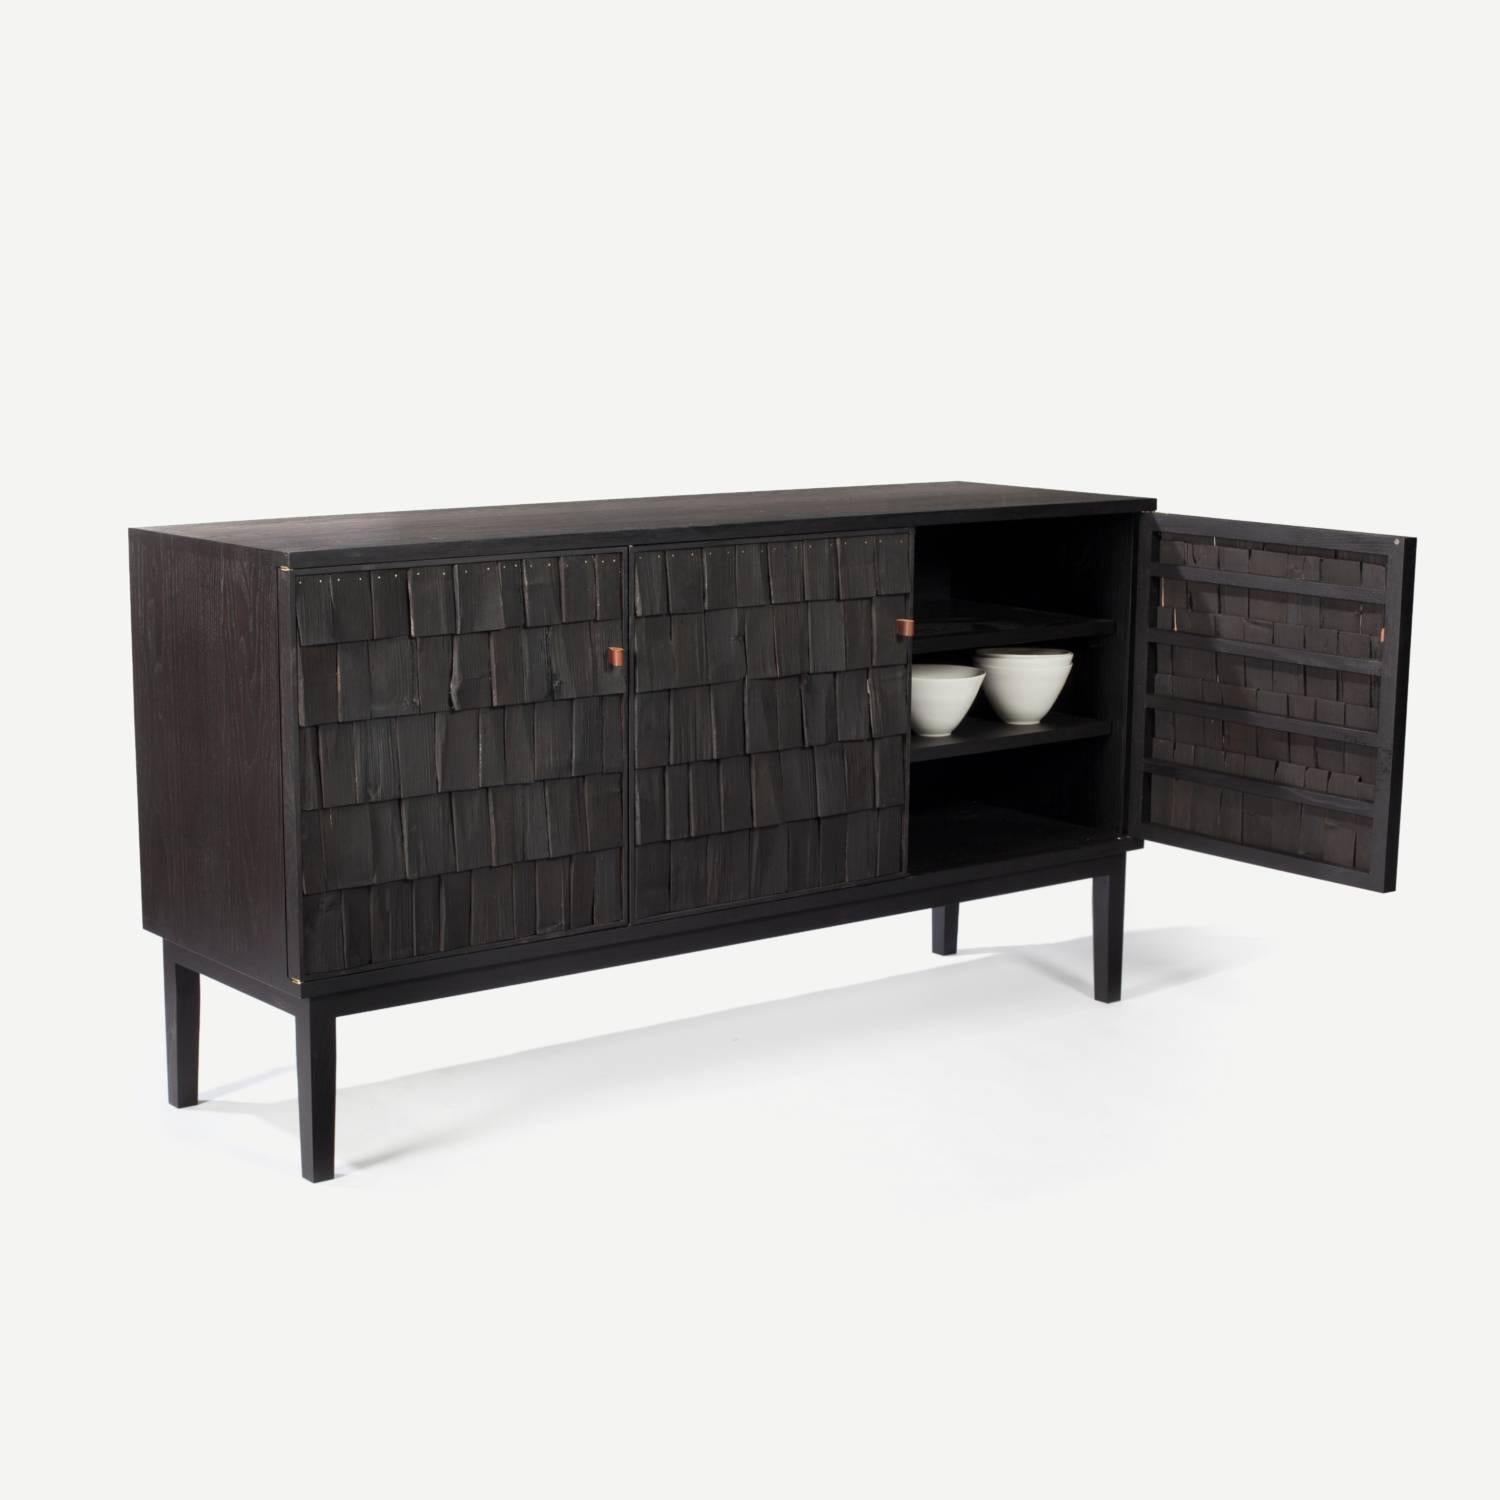 Scorched “Shake” sideboard by Sebastian Cos and Benchmark Furniture. A contemporary sideboard cabinet constructed with blackened shakes in chestnut and ash timber. Blackened exclusively for The New Craftsmen, each shake – a type of shingle commonly